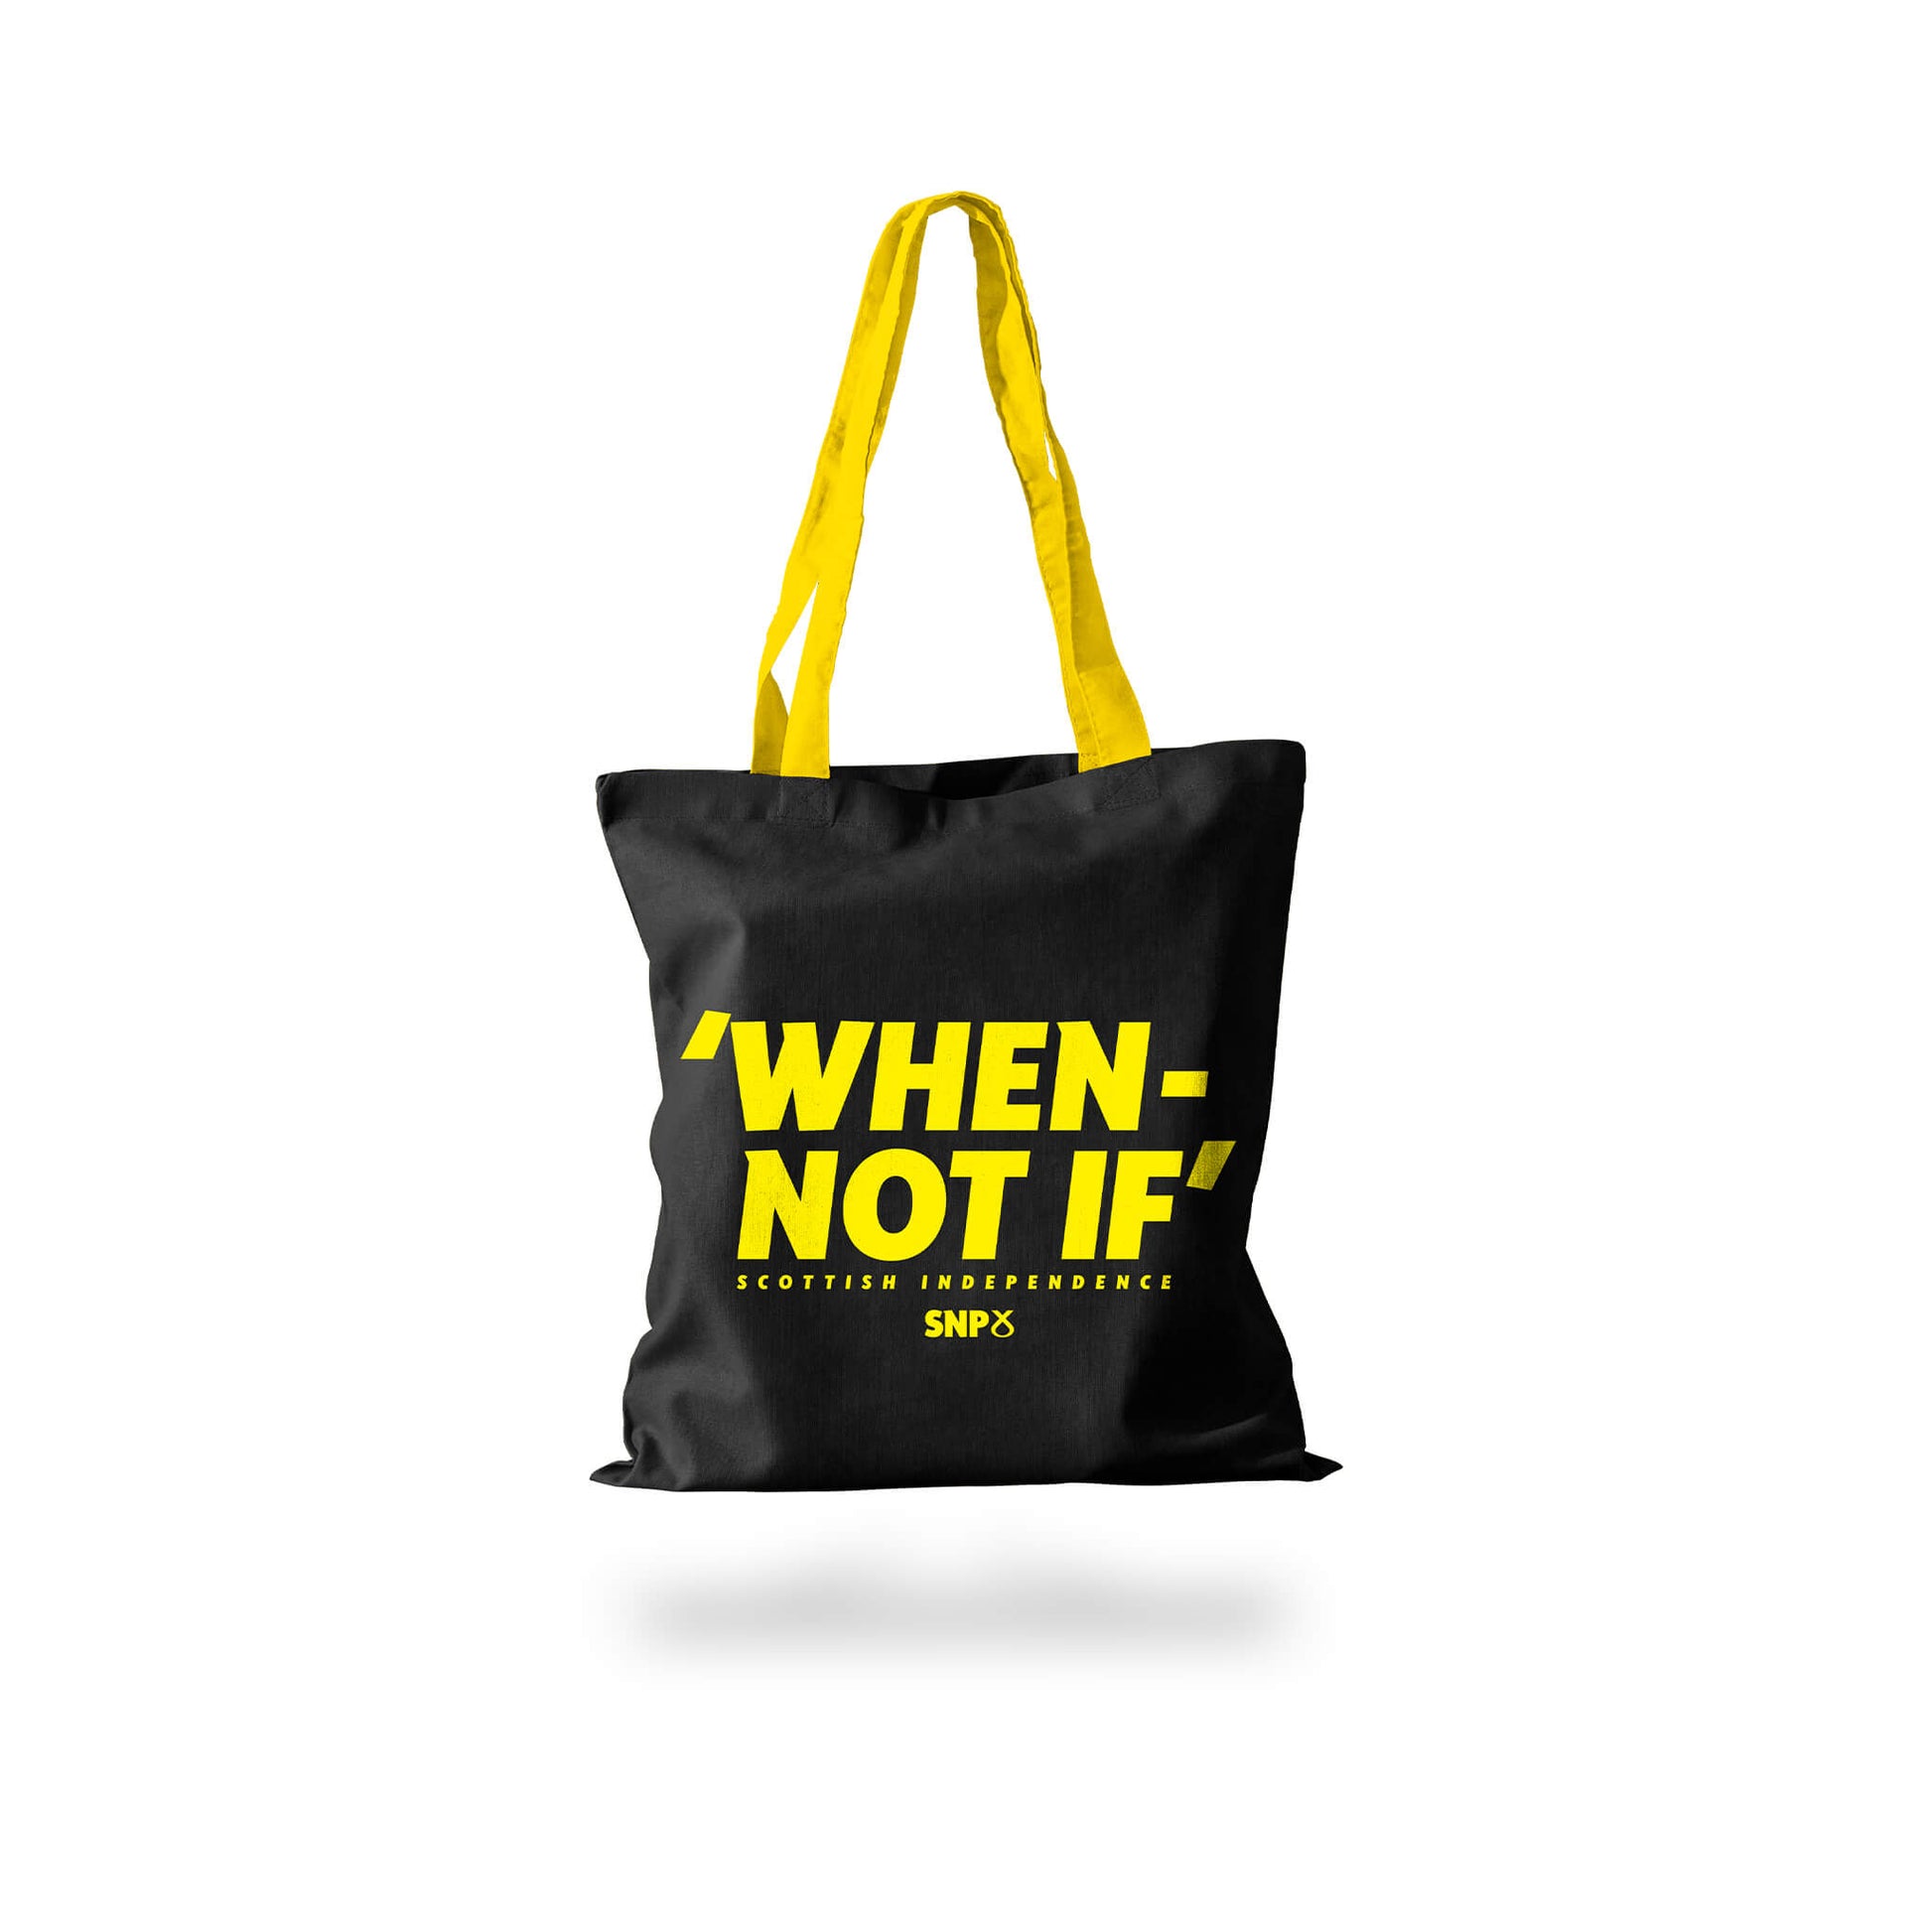 Cotton Tote Bag When Not If Contrast SNP